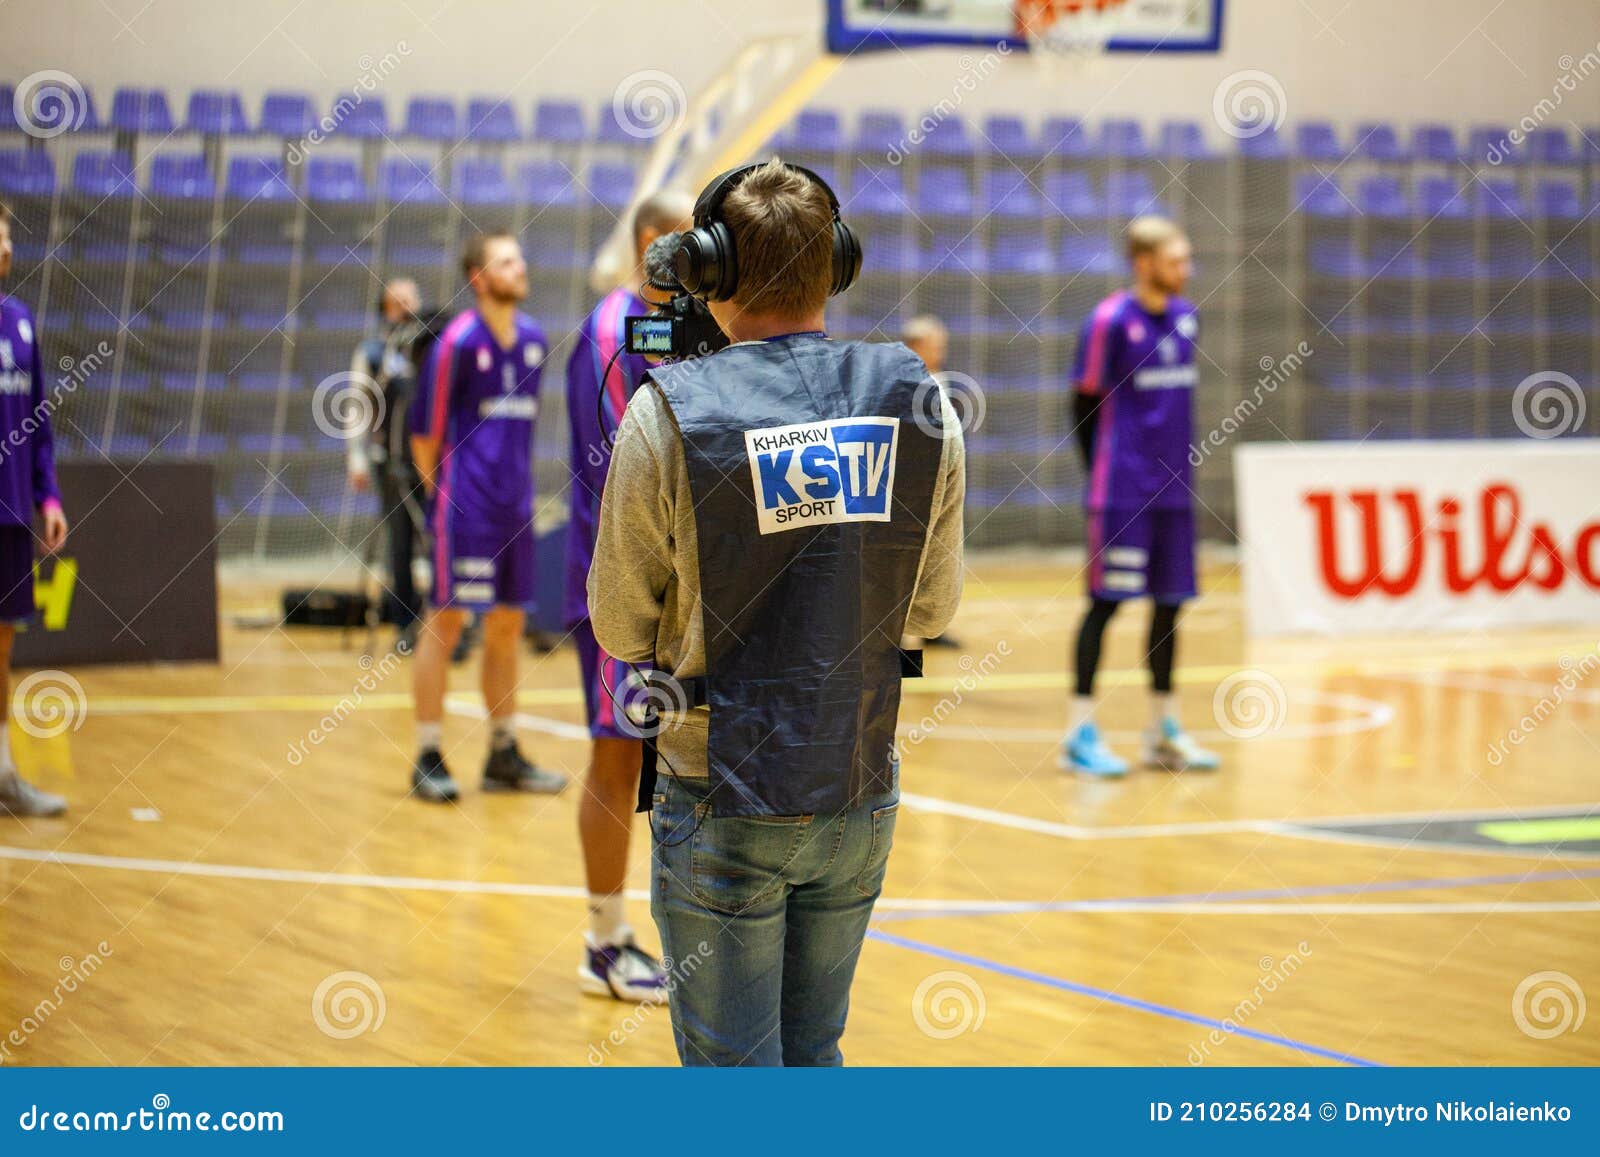 Cameraman with High Definition Video System and Headphone Recording Live Stream during Basketball Match of Ukrainian Superleage Editorial Stock Image